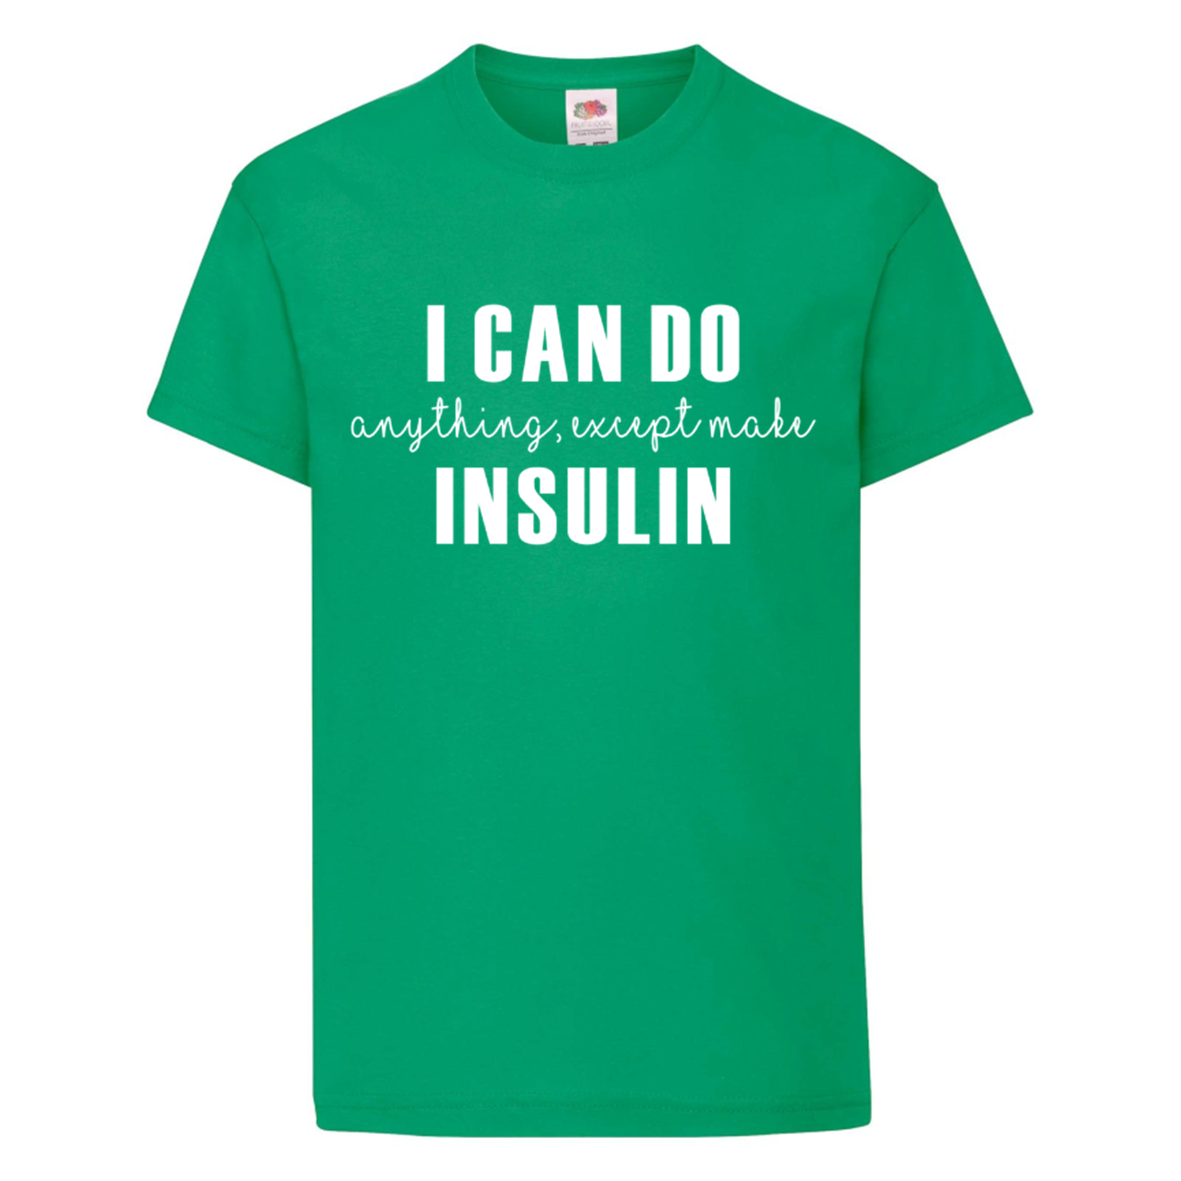 I Can Do Anything, Except Make Insulin Kids T Shirt